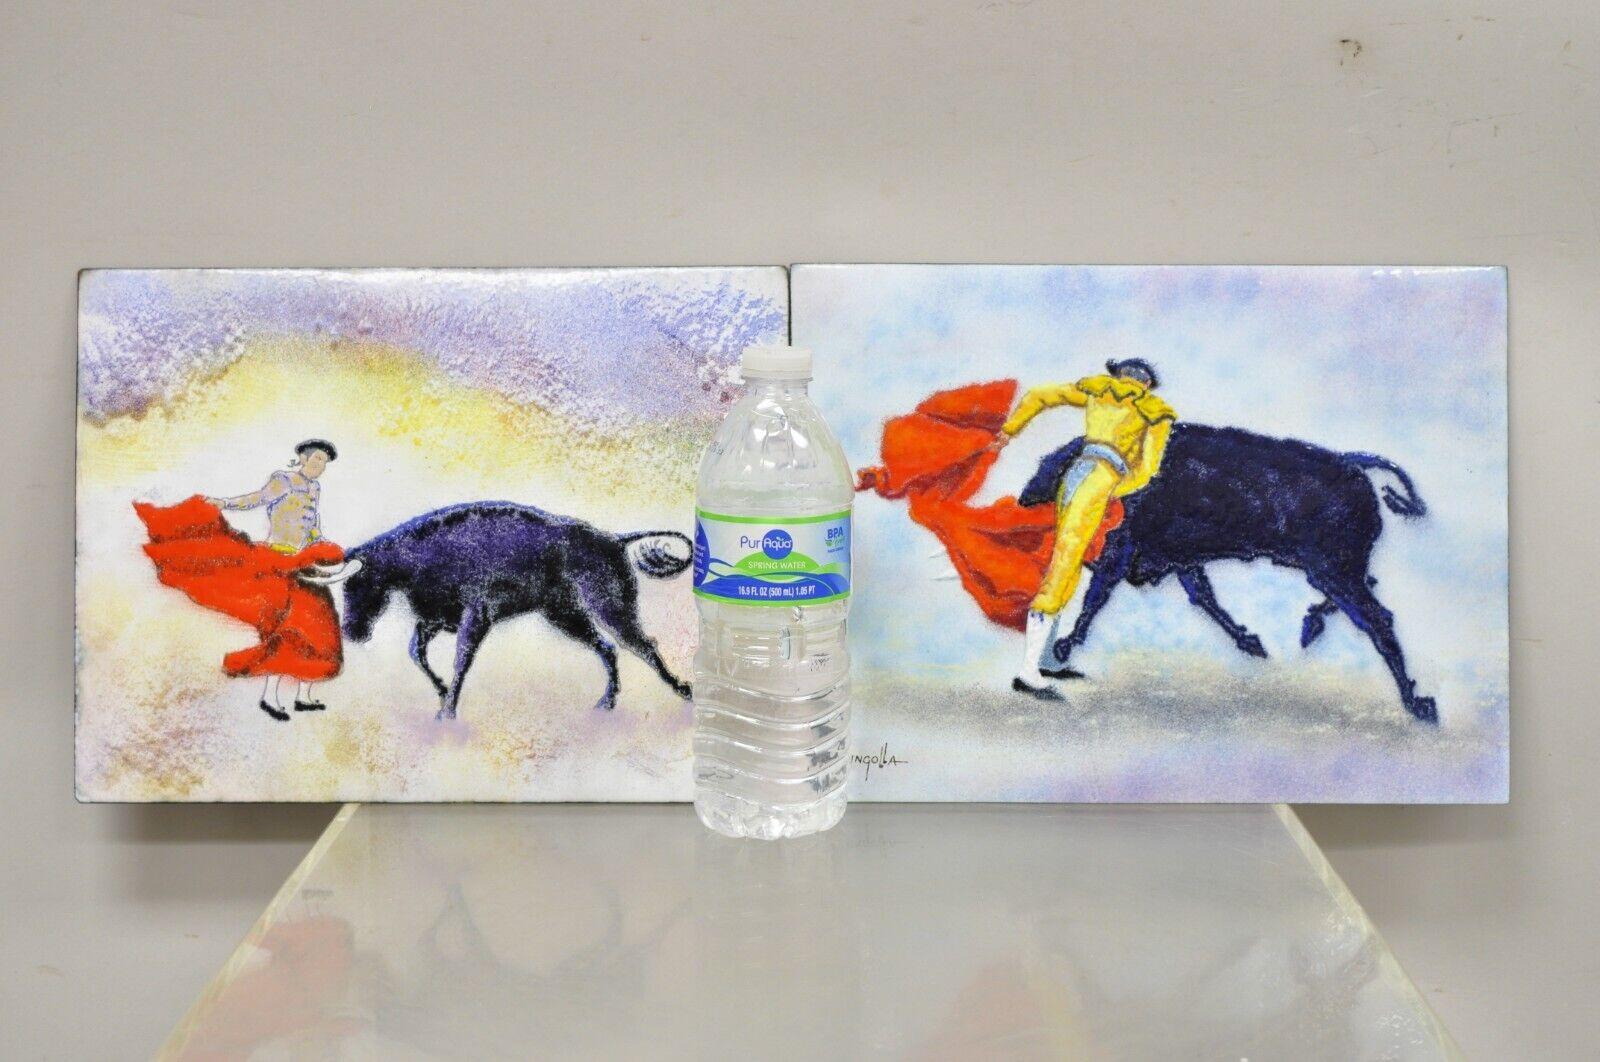 Dom Dominic Mingolla Enamel on copper painting Spanish Matador 9 x 12 - a Pair. Listing includes (2) Paintings included, enamel on copper medium, artist signature to bottom left and right corner, beautiful subject and color, unframed. Circa Late